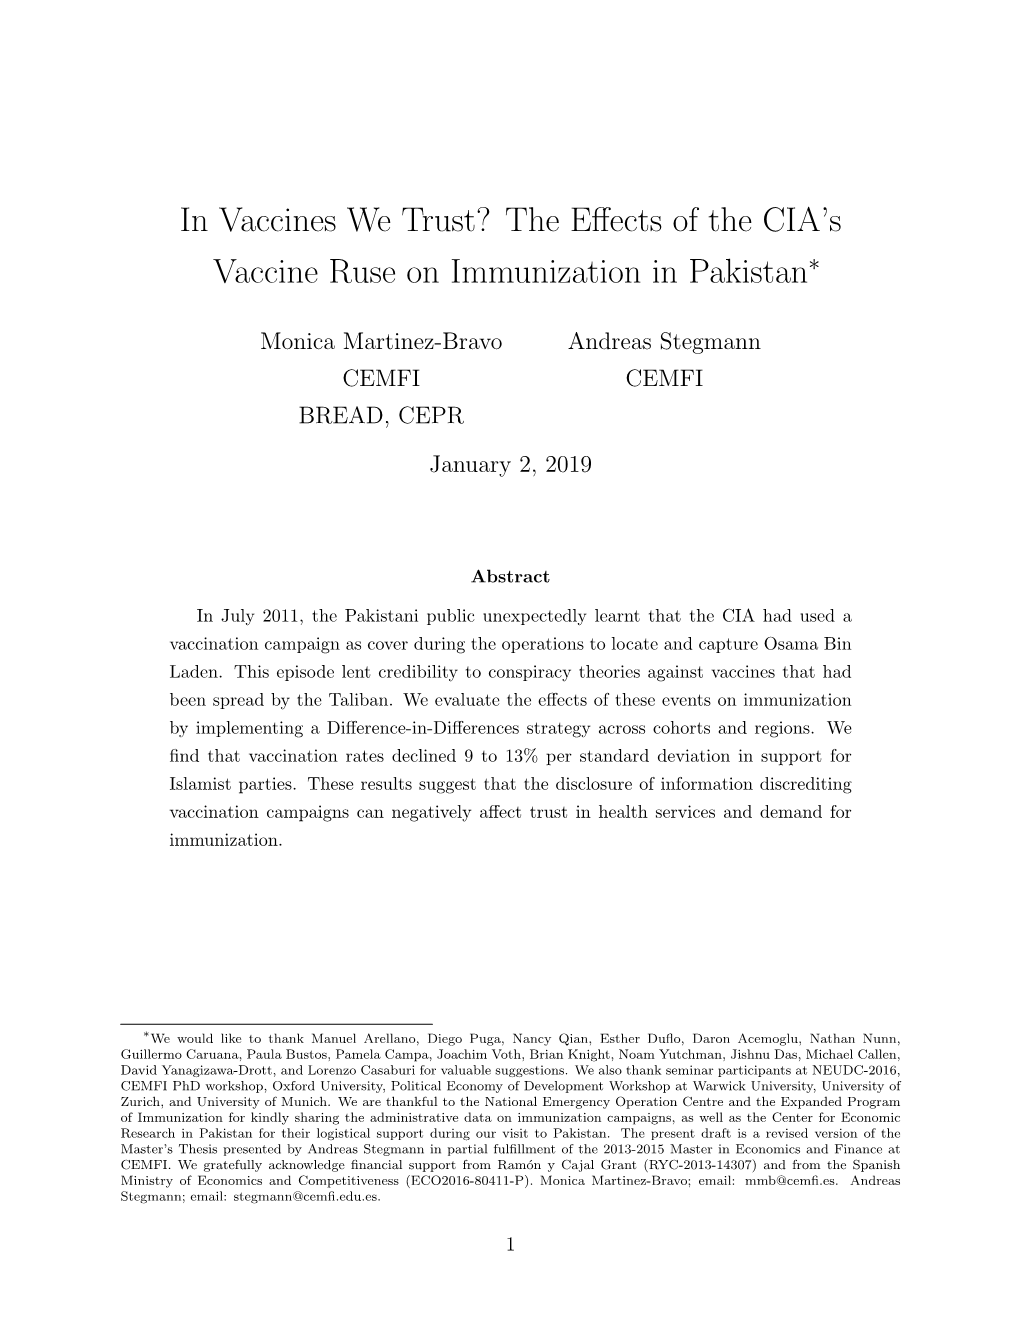 The Effects of the CIA's Vaccine Ruse on Immunization in Pakistan